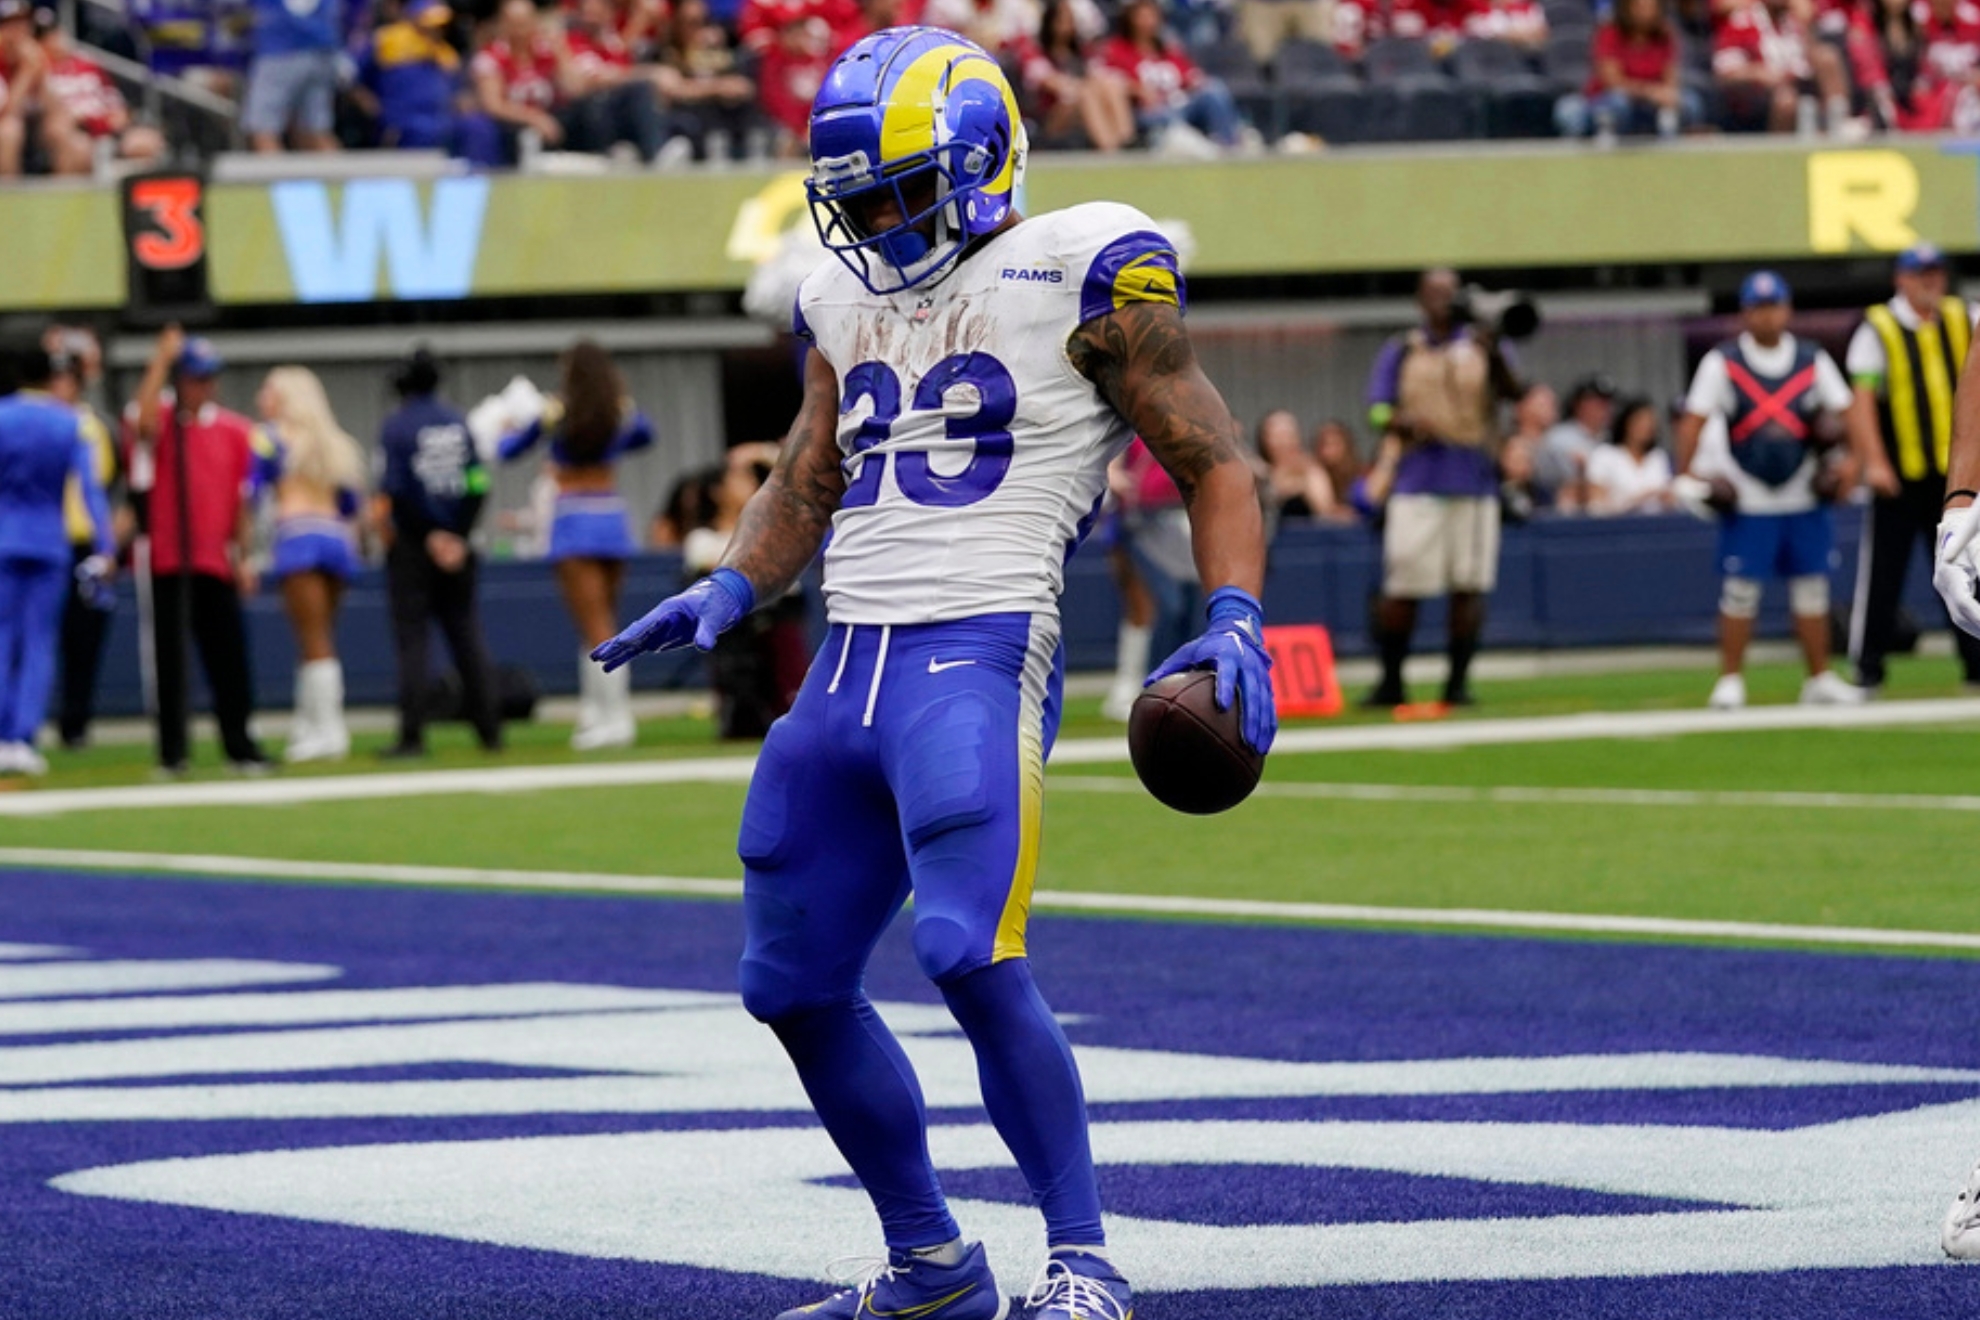 Williams has been a breakout star for the Rams